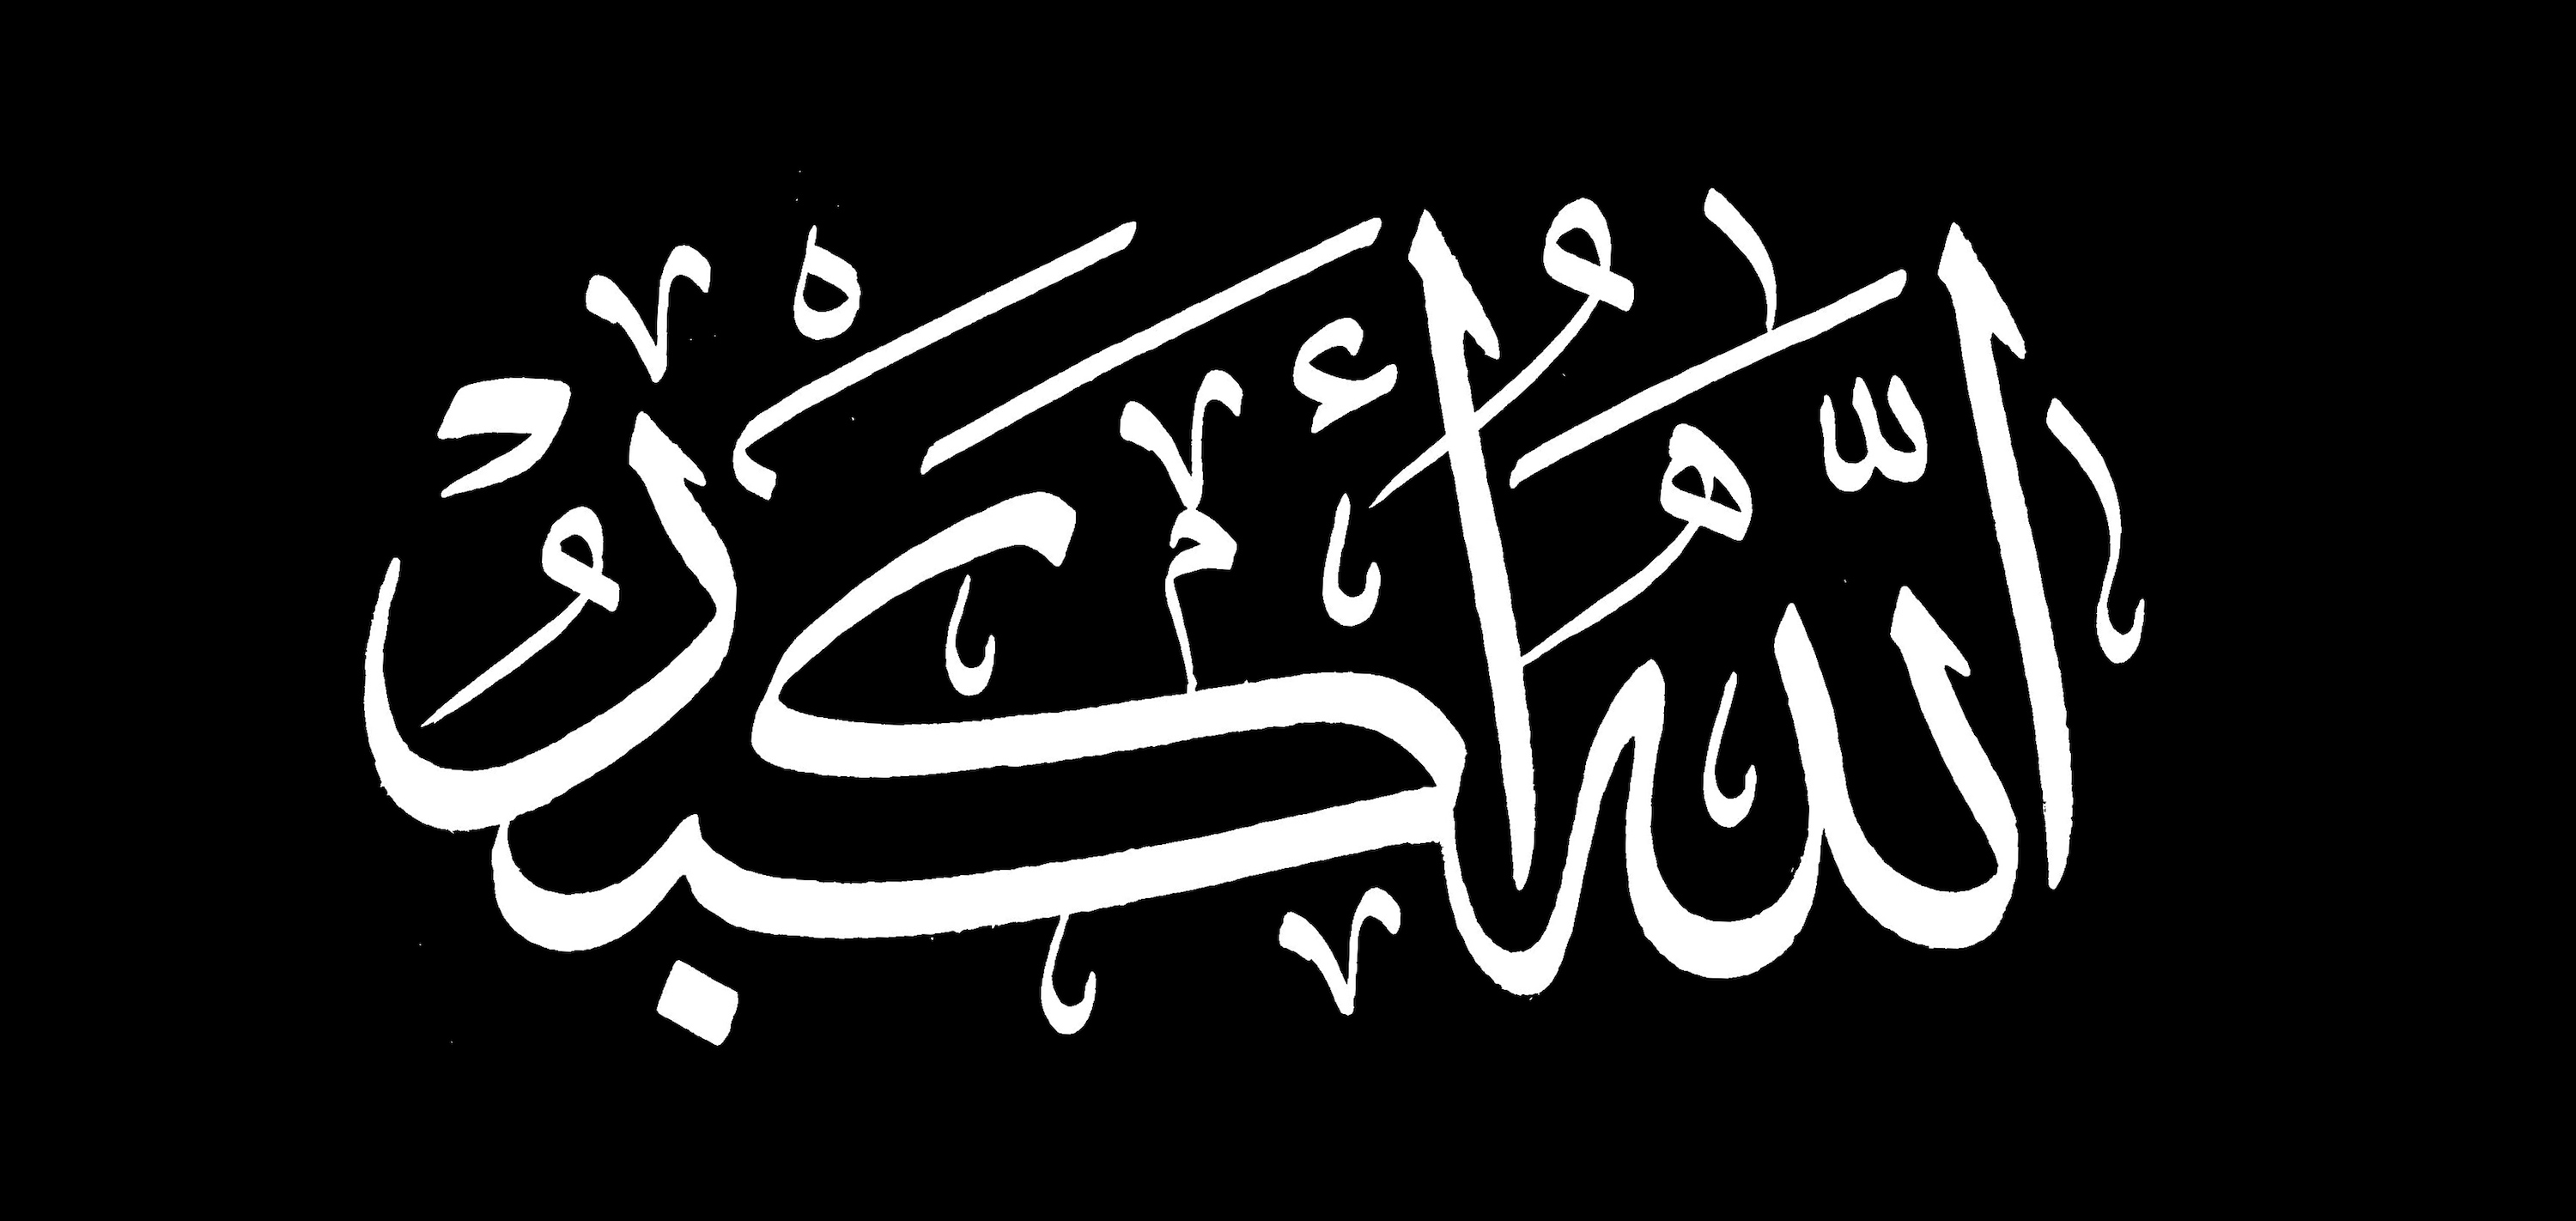 Allah Wallpapers, Pictures, Images